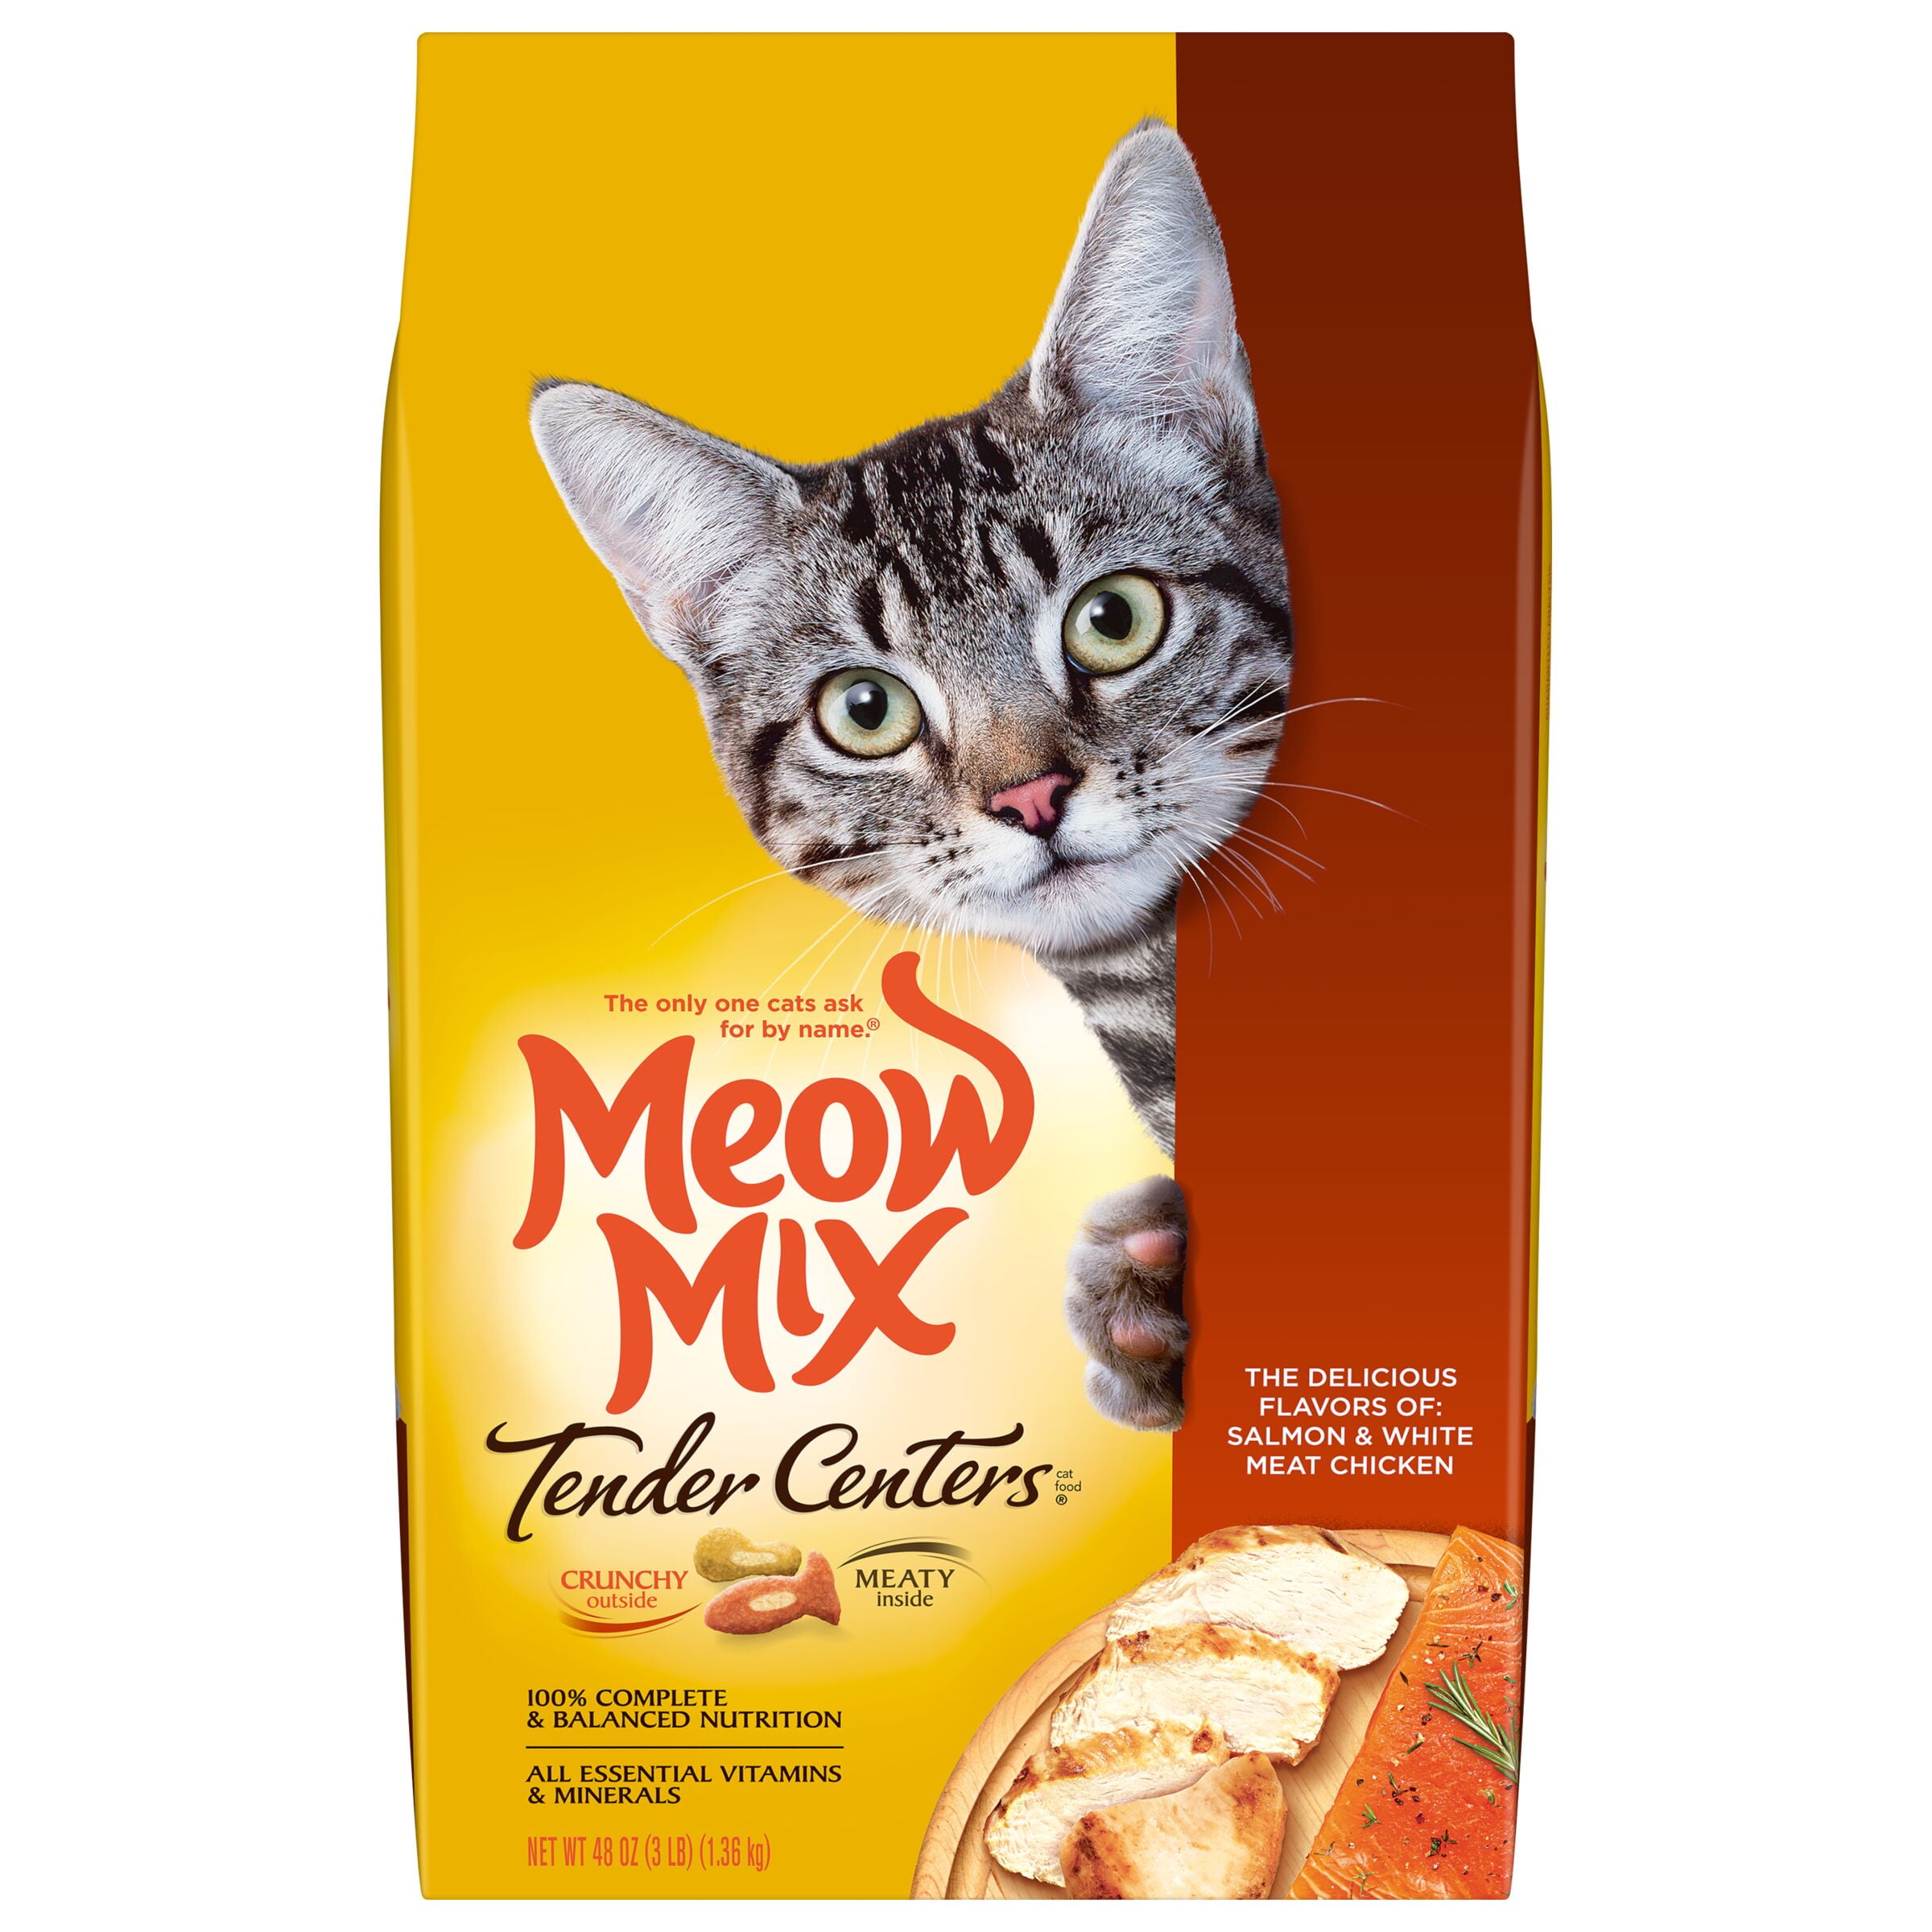 Meow Mix Tender Centers Salmon & White Meat Chicken Flavors Dry Cat Food, 3-Pound Bag